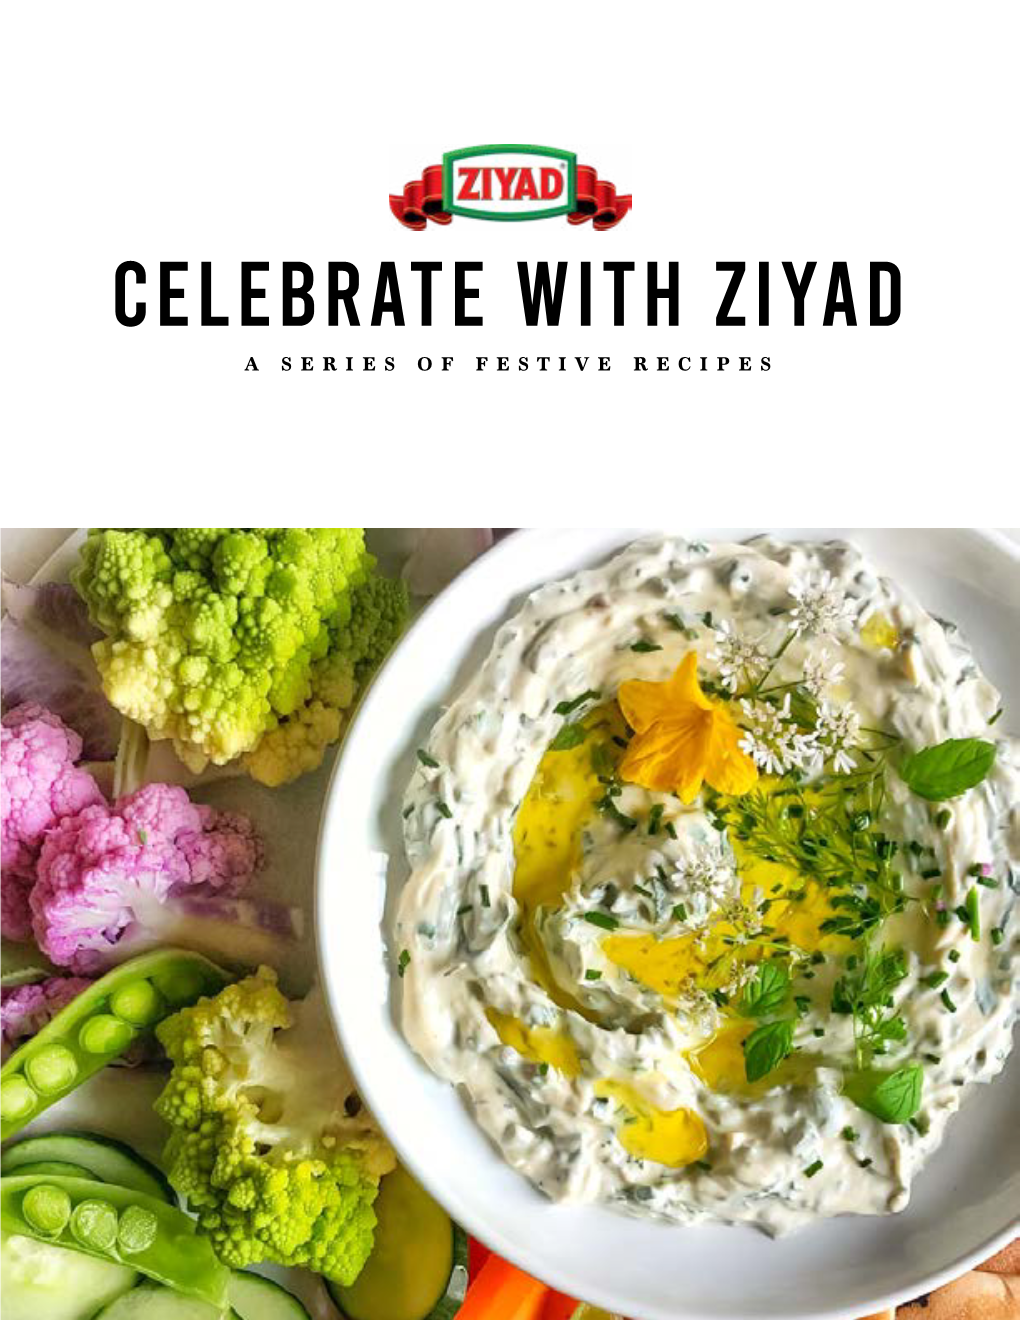 Celebrate with Ziyad a SERIES of FESTIVE RECIPES